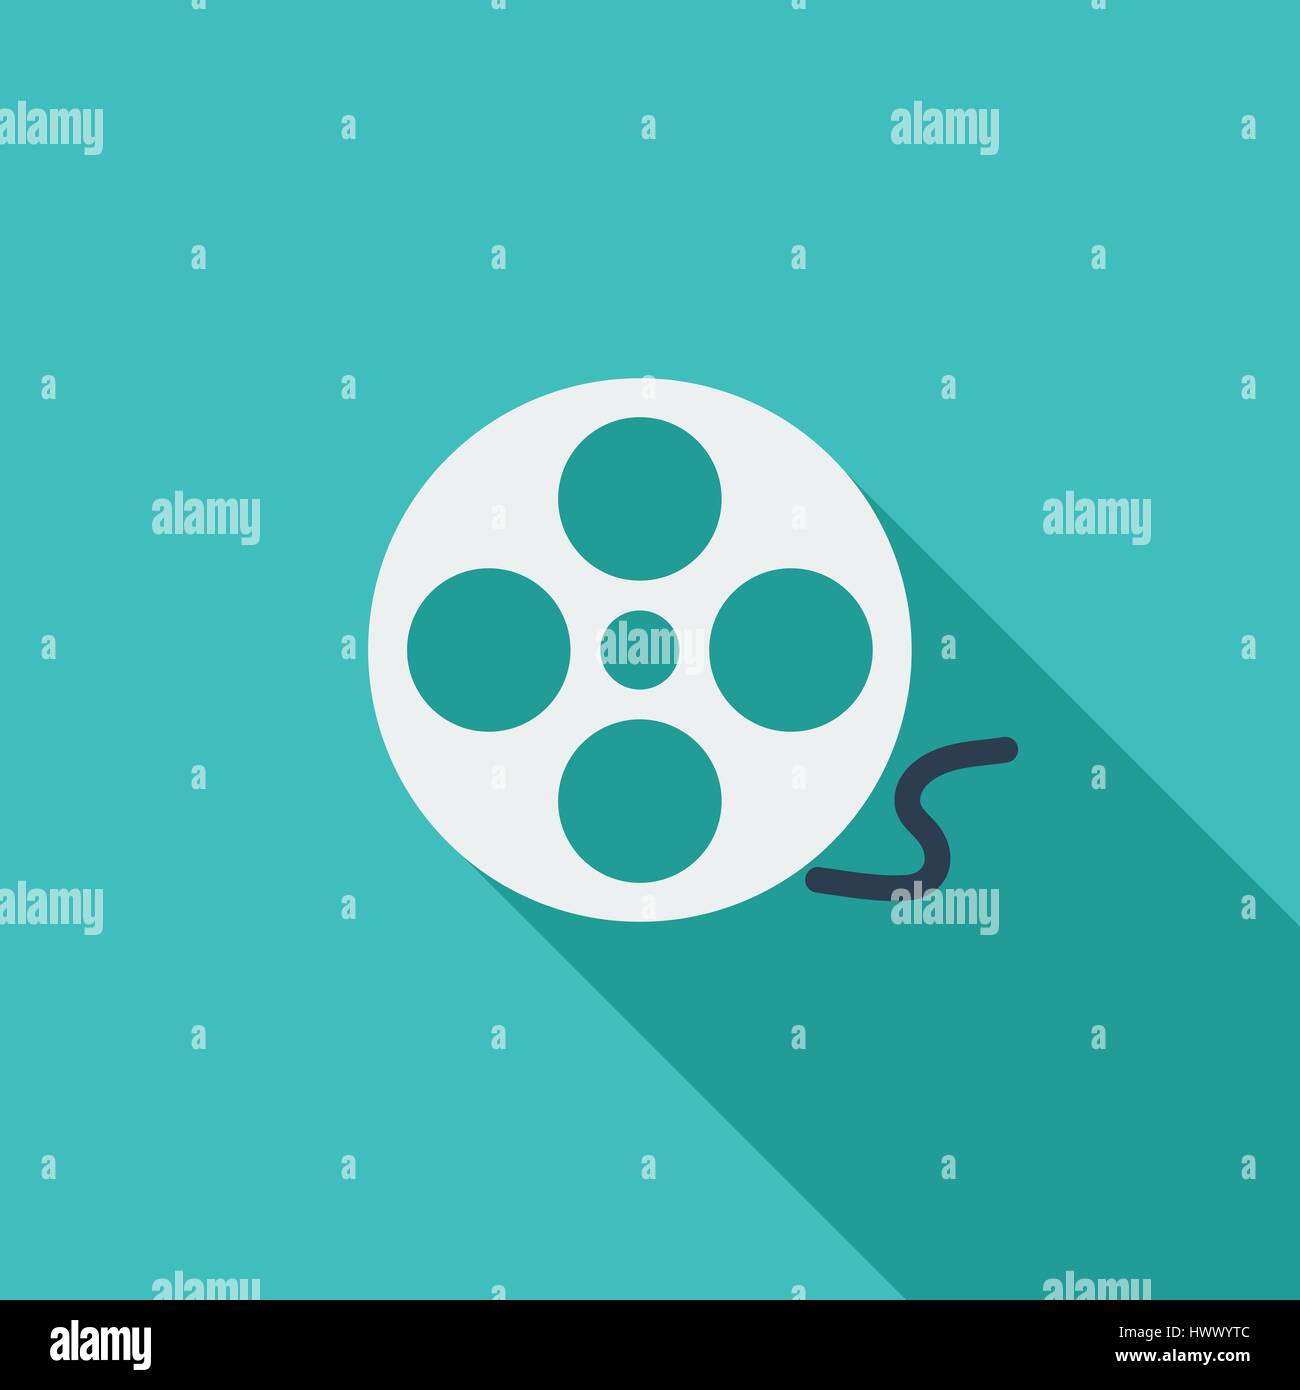 Reel of film icon. Flat vector related icon with long shadow for web and mobile applications. It can be used as - logo, pictogram, icon, infographic e Stock Vector